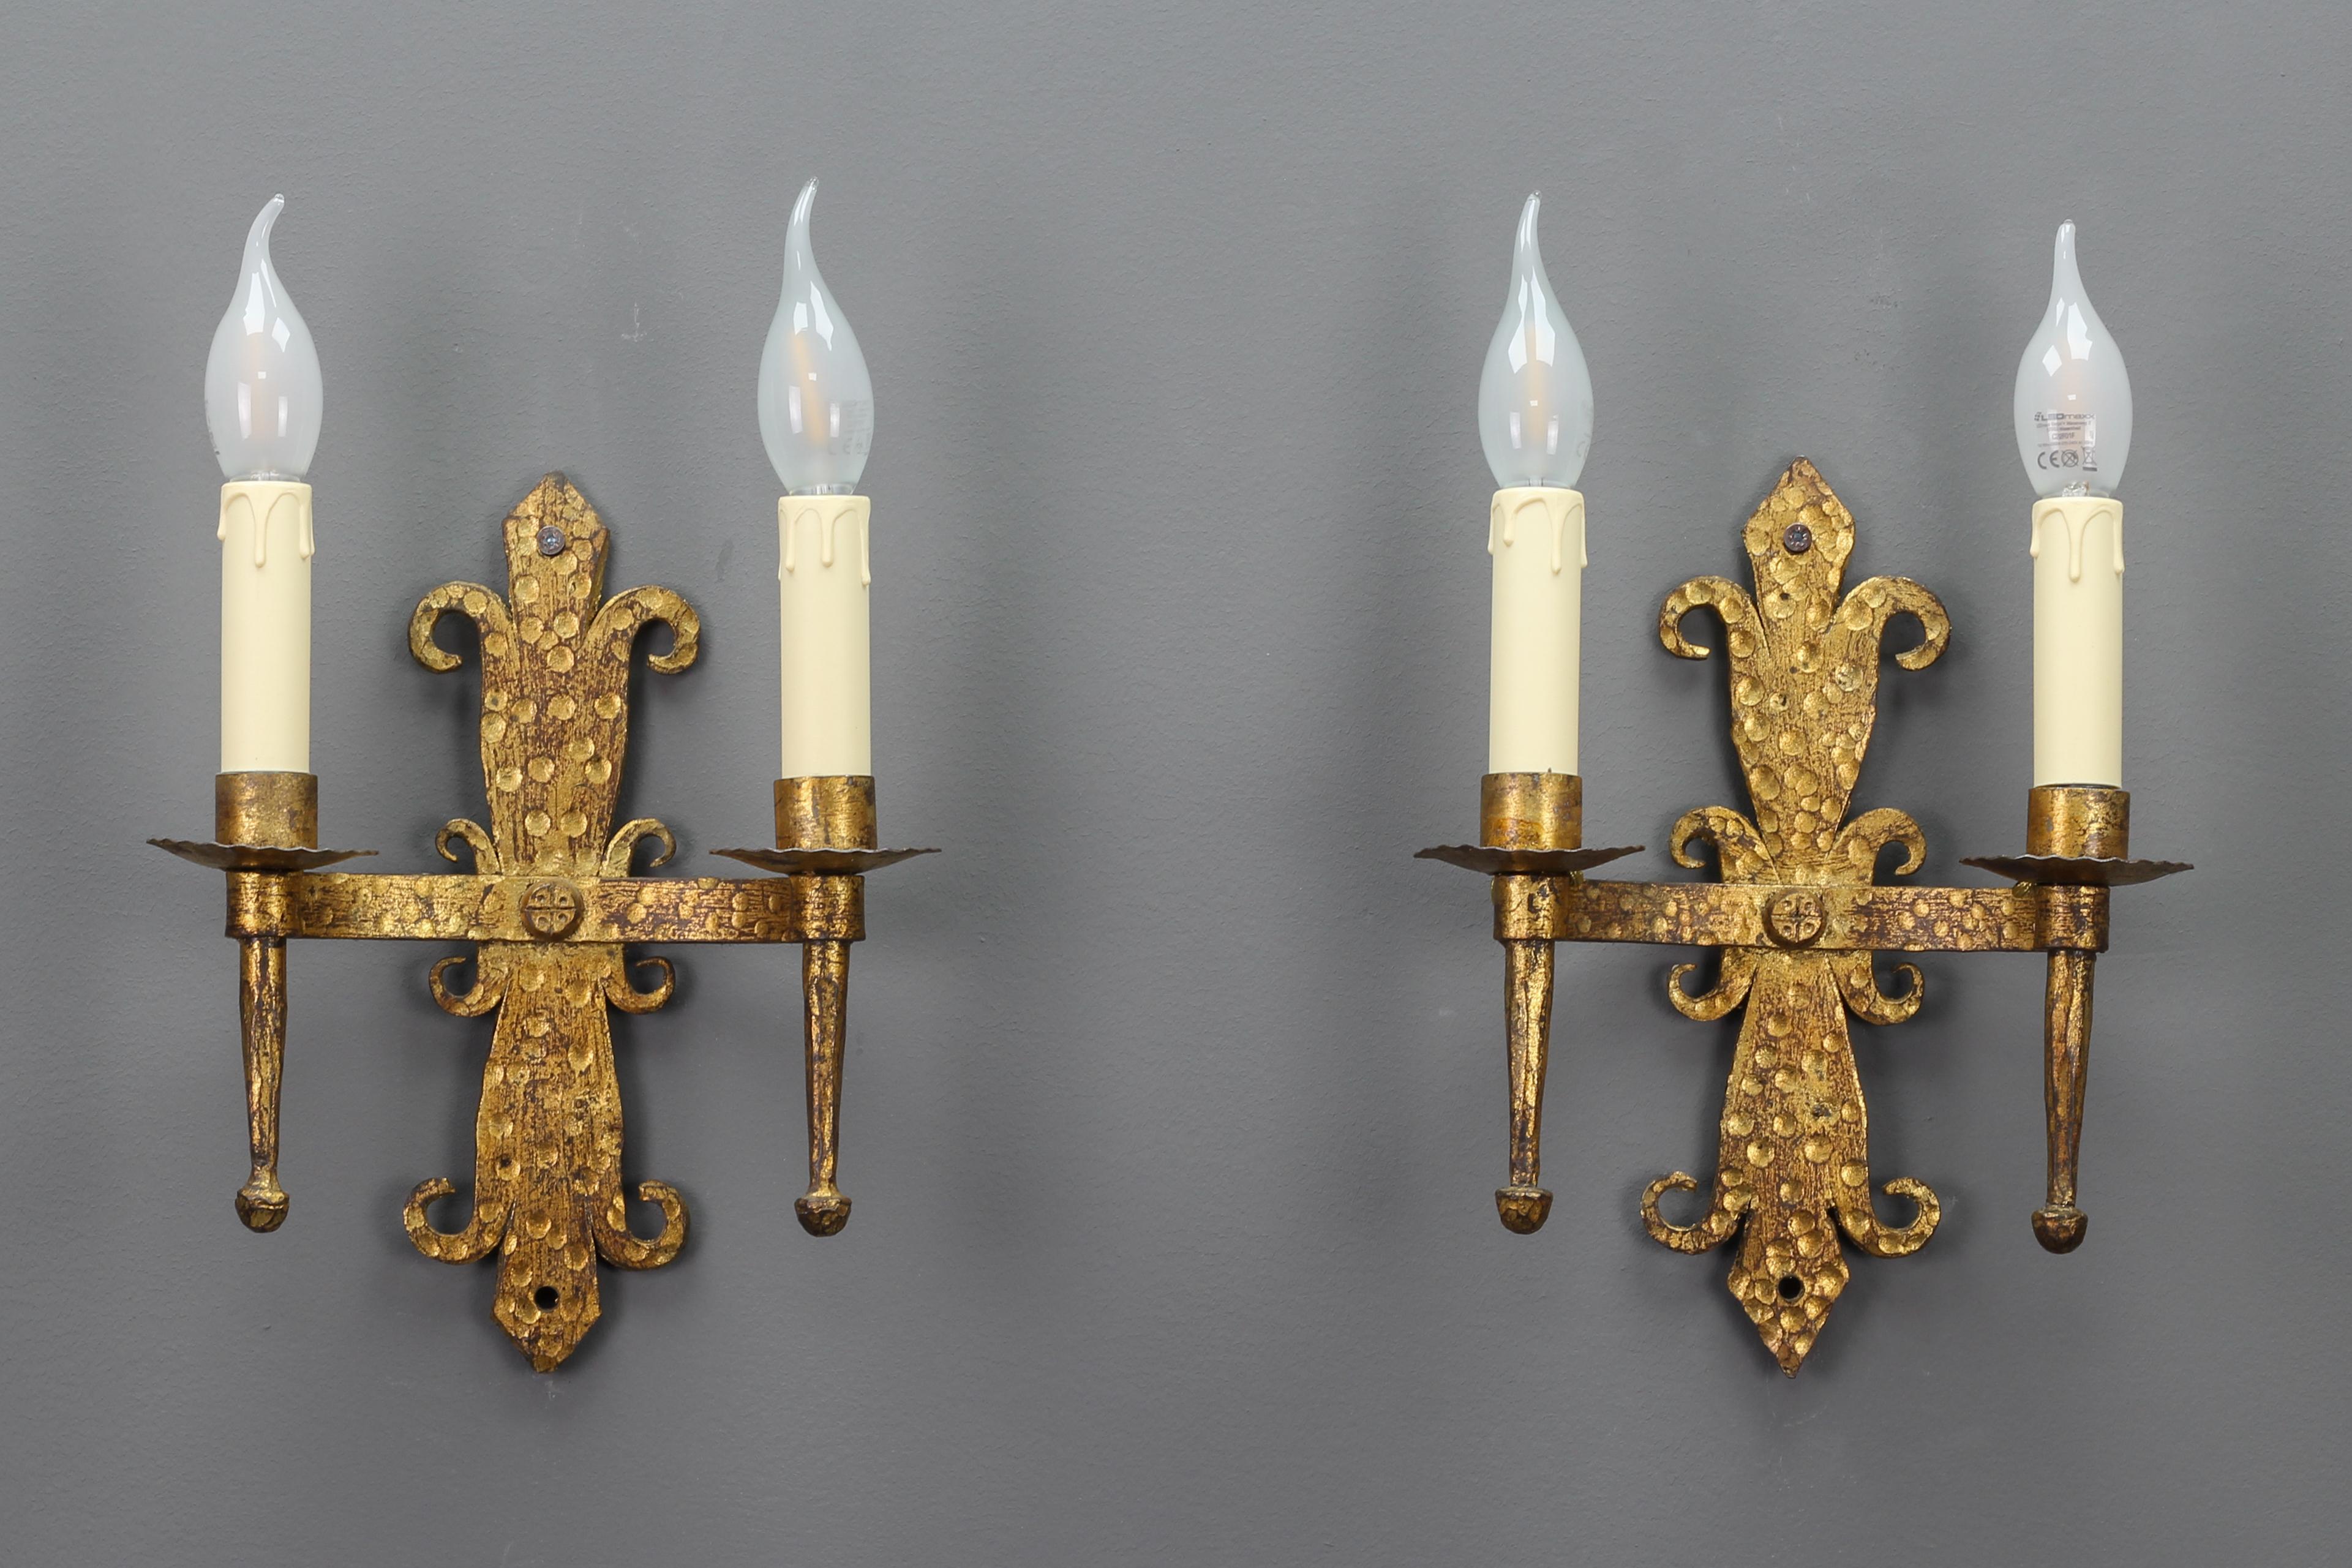 Late 19th-century French gilt wrought iron two-light sconces, set of two.
A beautiful pair of Medieval style sconces, France, from the late 19th century.
These wrought iron wall lamps with a gold-plated patina each have two lights with sockets for